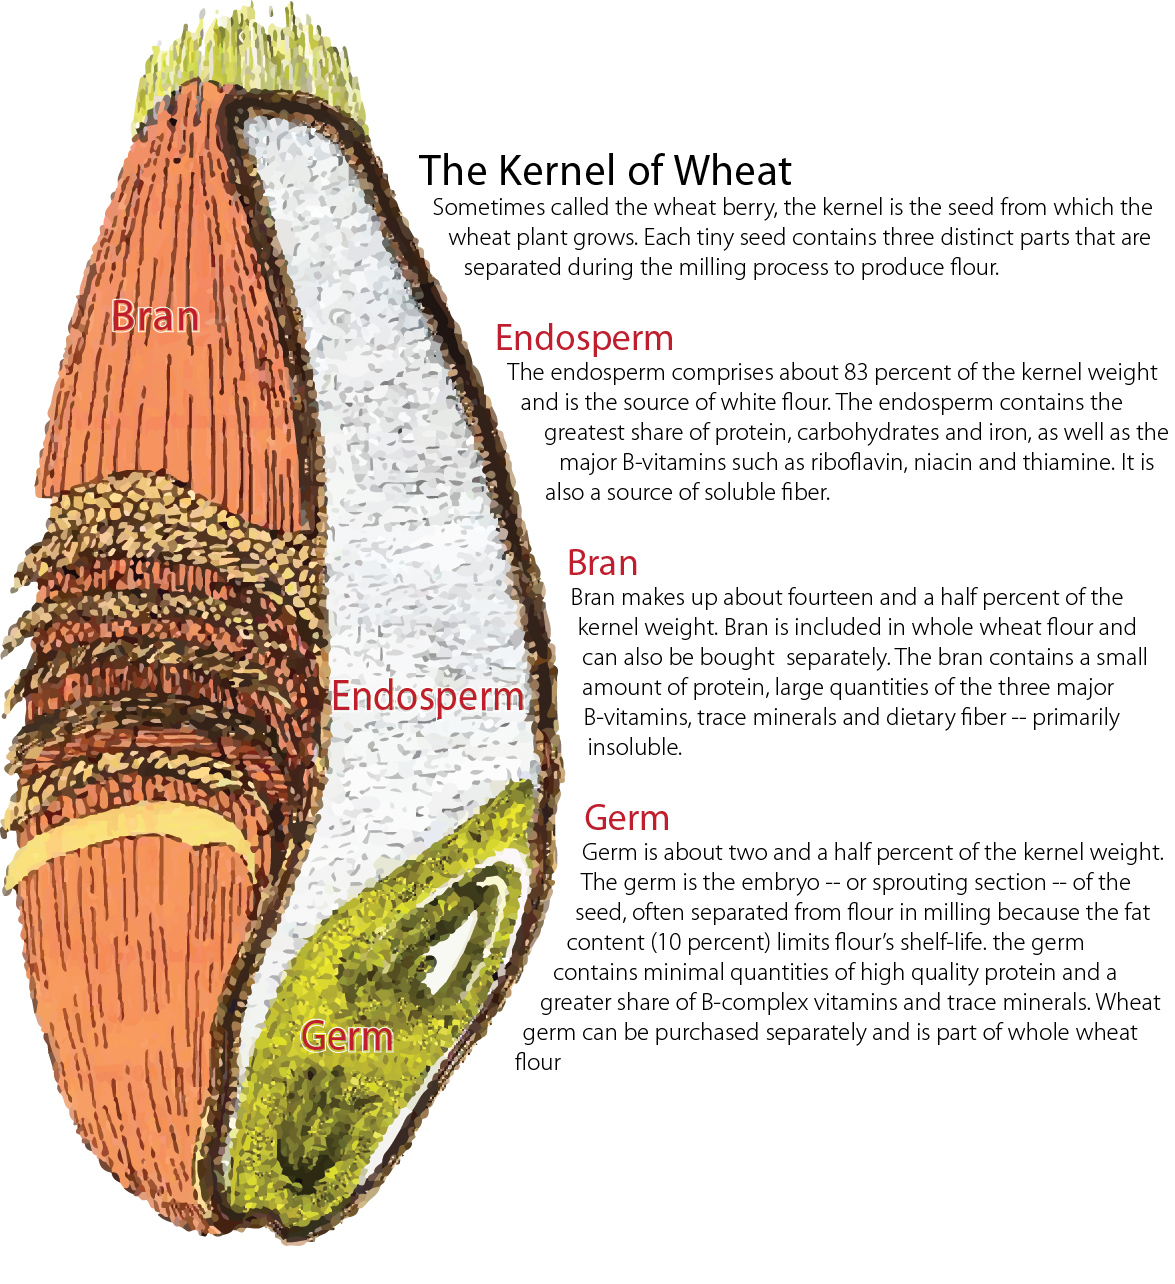 Illustration of a Kernel of Wheat